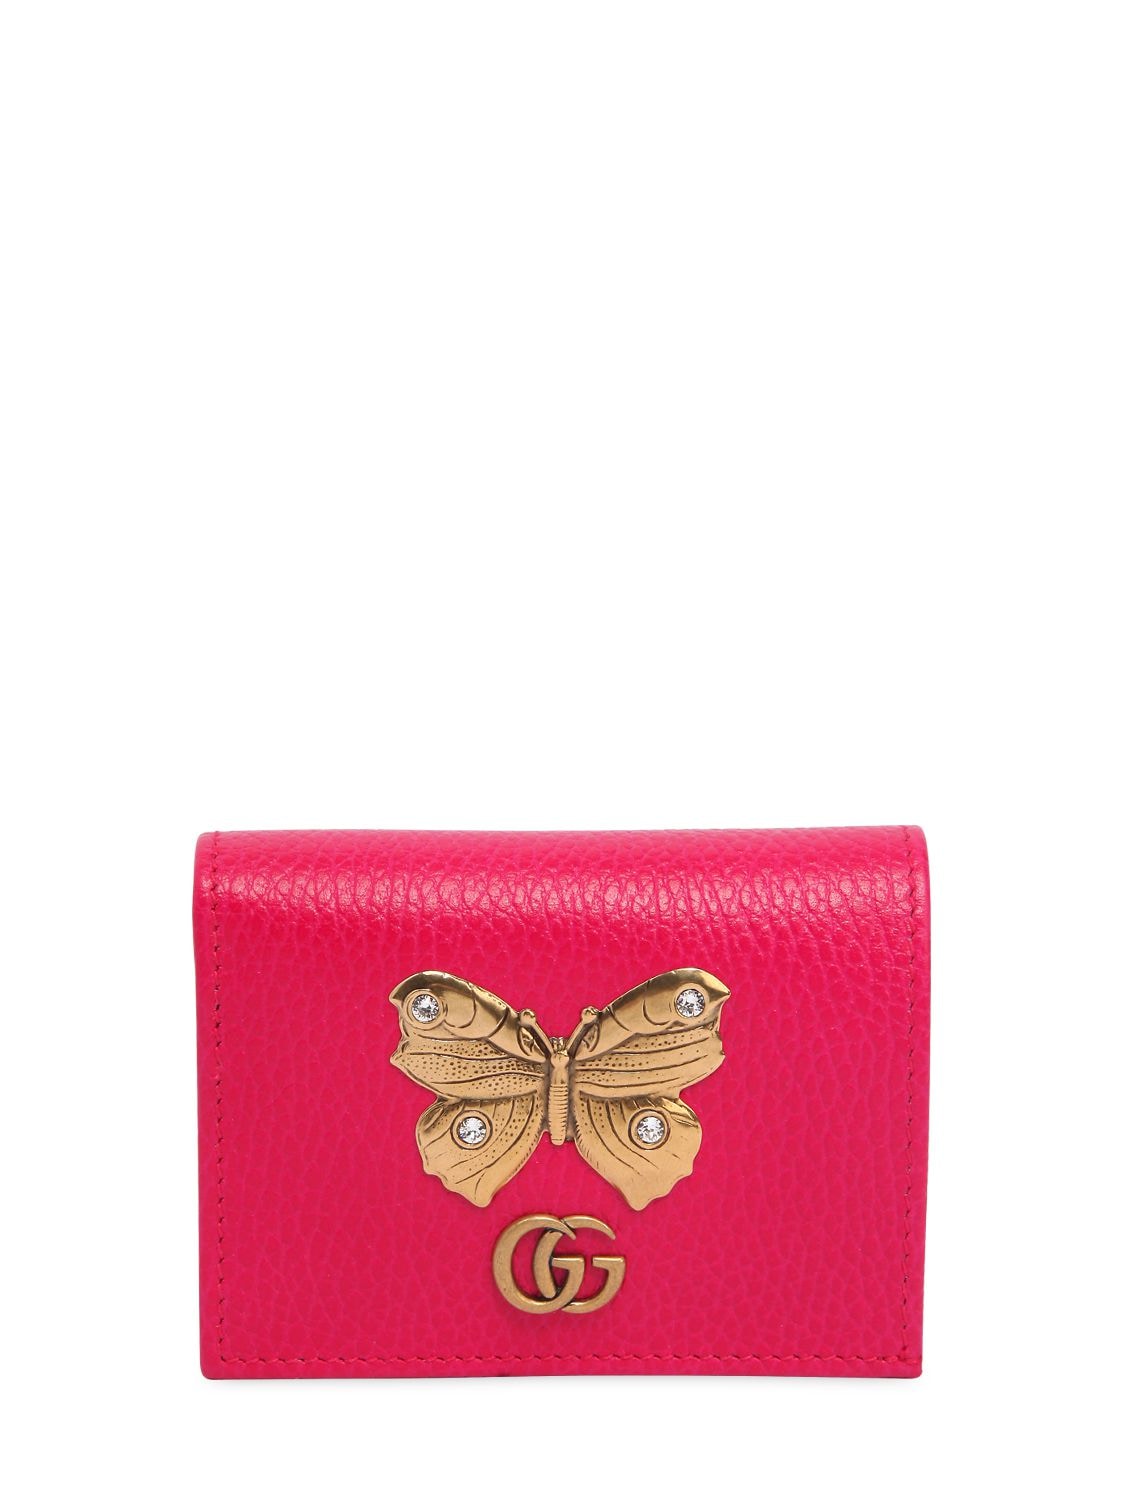 GUCCI BUTTERFLY LEATHER CARD CASE,67IIJS045-NTY2MQ2